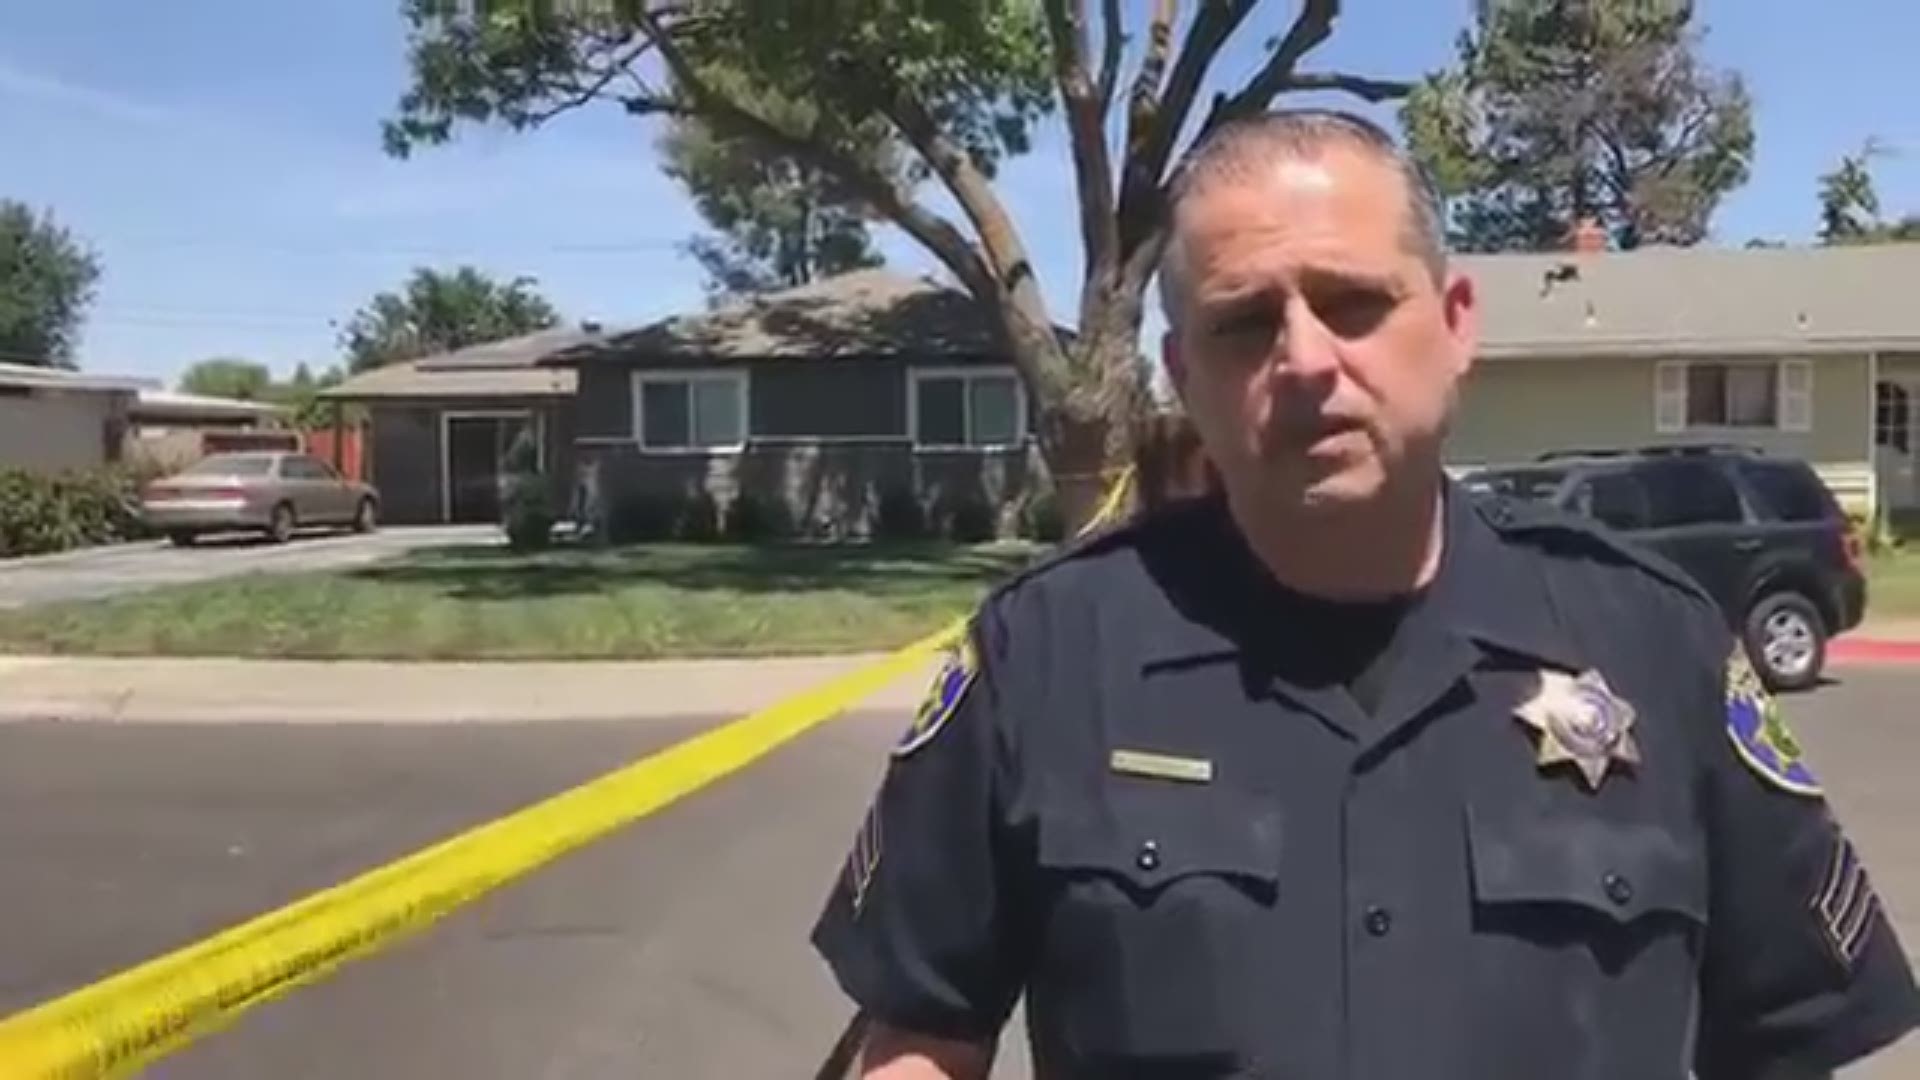 Update on Woodland High School 
Sgt, Dallas Hyde, of the Woodland Police Department, tells ABC10 that the lockdown came after a 911 call this morning.